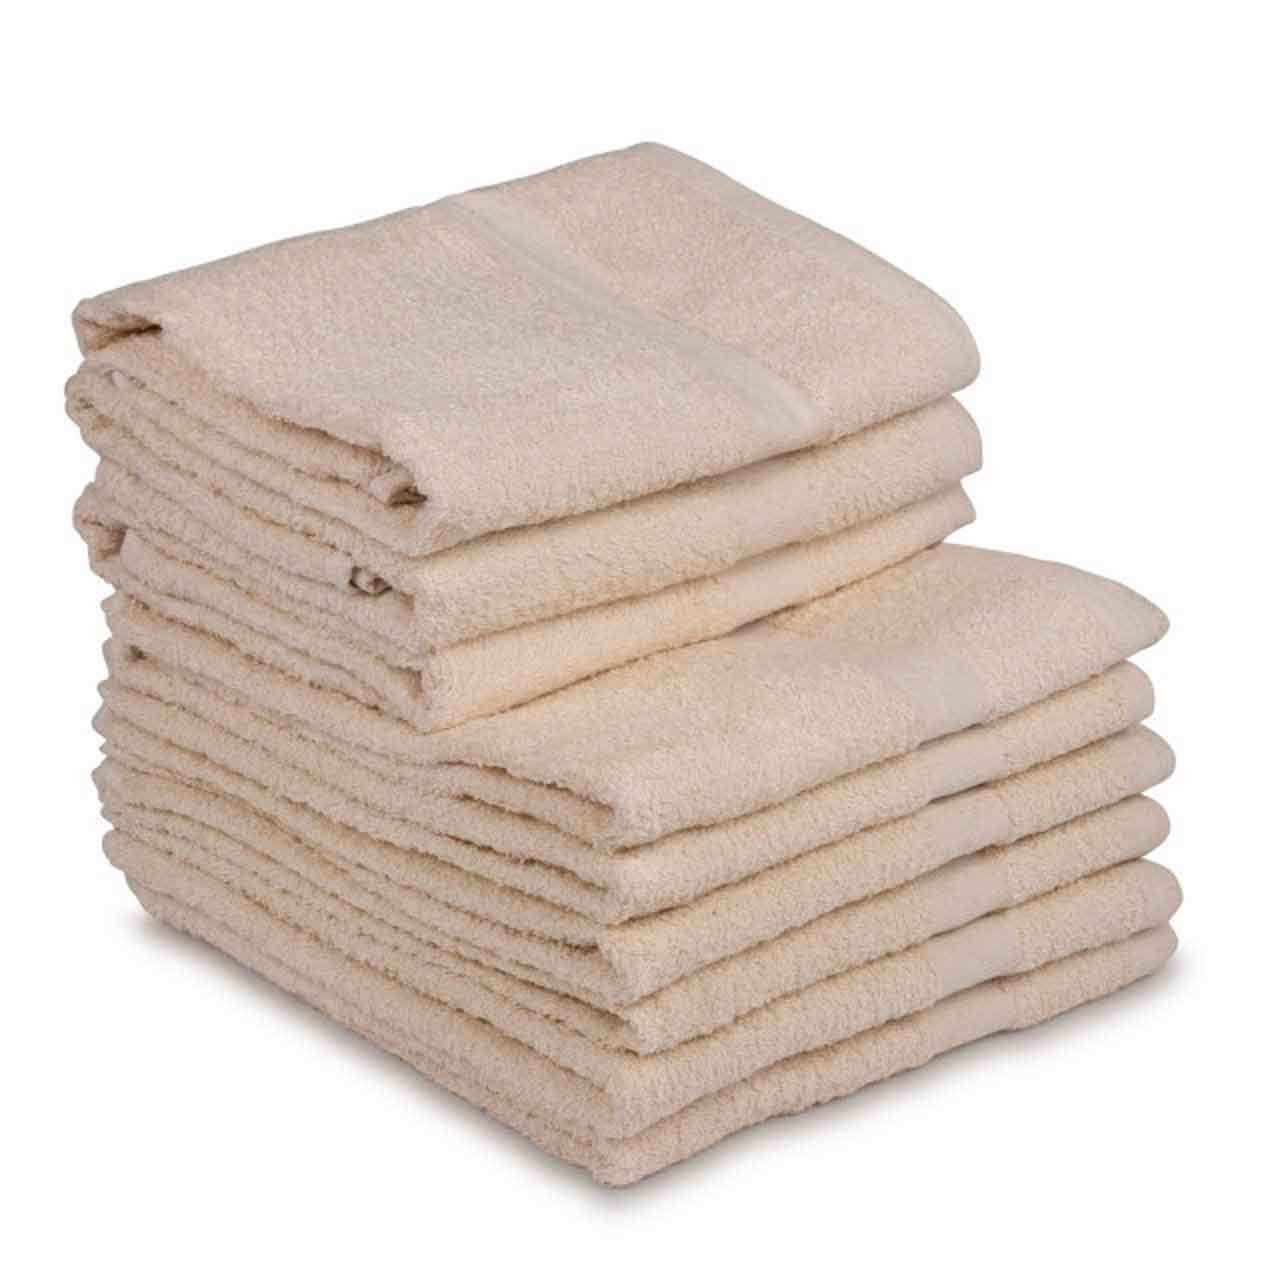 Can ecru towels withstand high use environments?